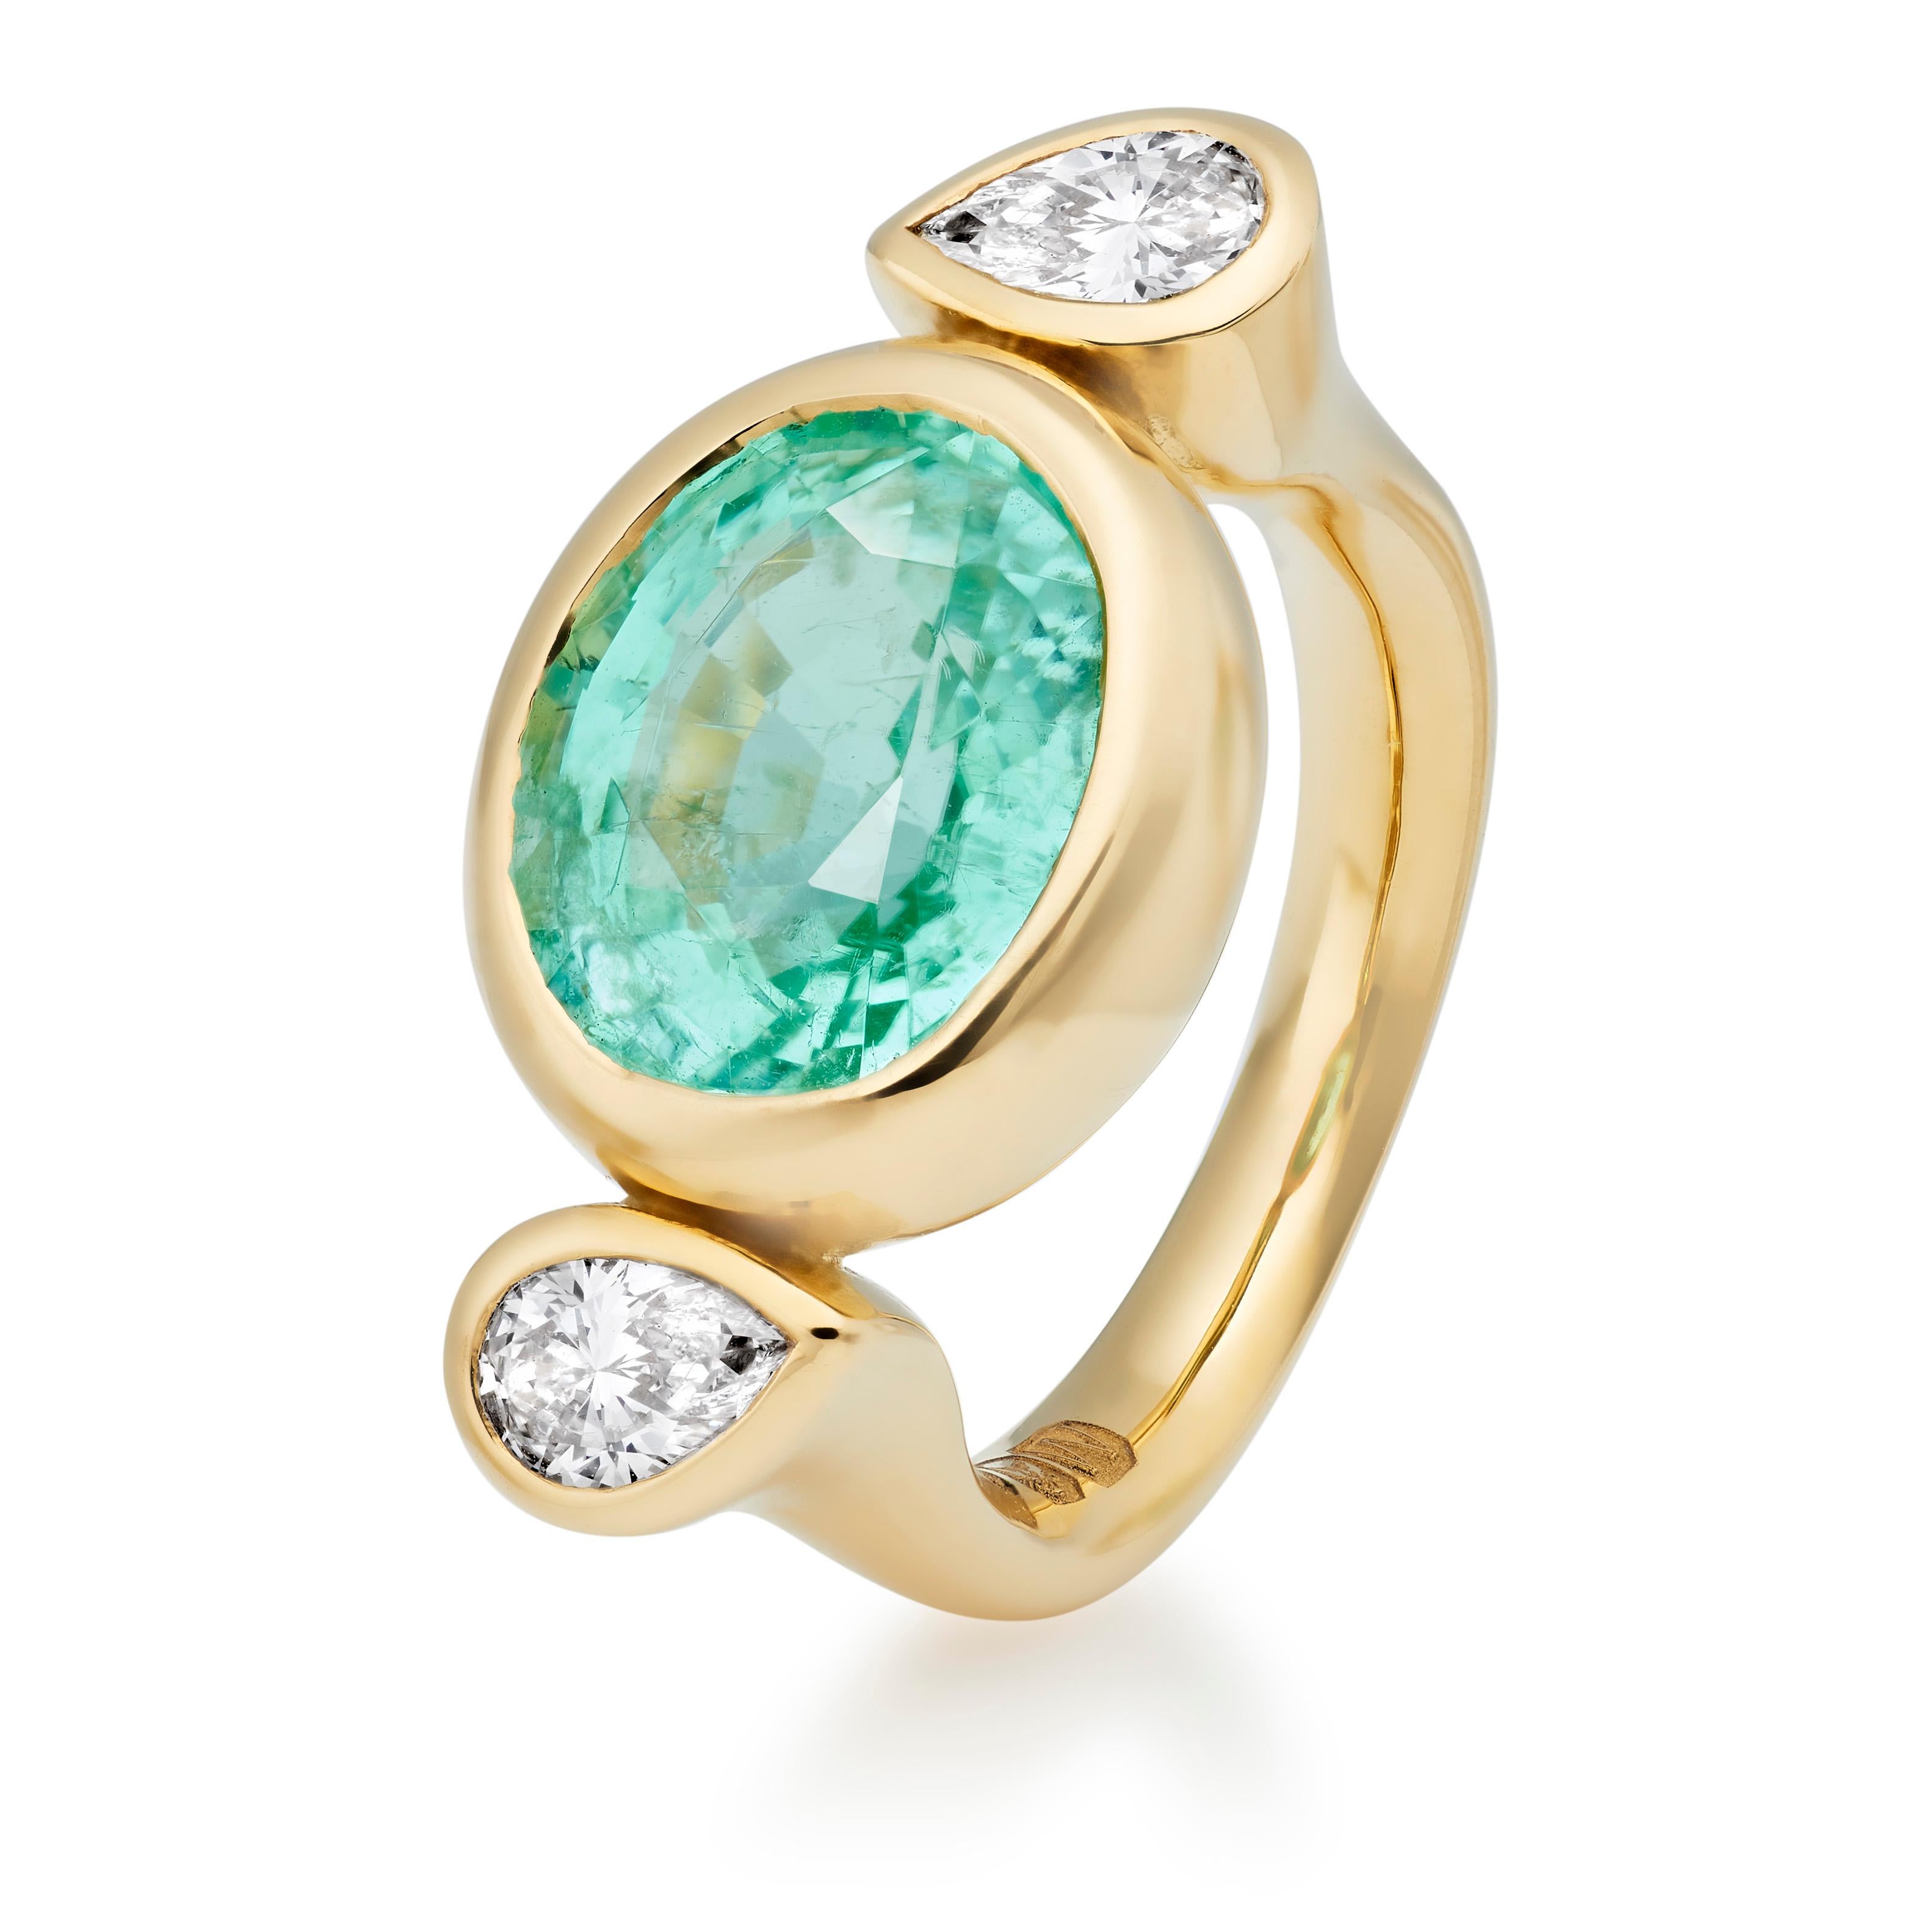 The Bon Bon is one of Lilly Hastedt's signature rings. This particular ring has the sought after Paraiba Tourmaline in an oval faceted cut paired with sparkling pear shaped diamonds. 

The design on this ring follows the roundness of the gemstones.